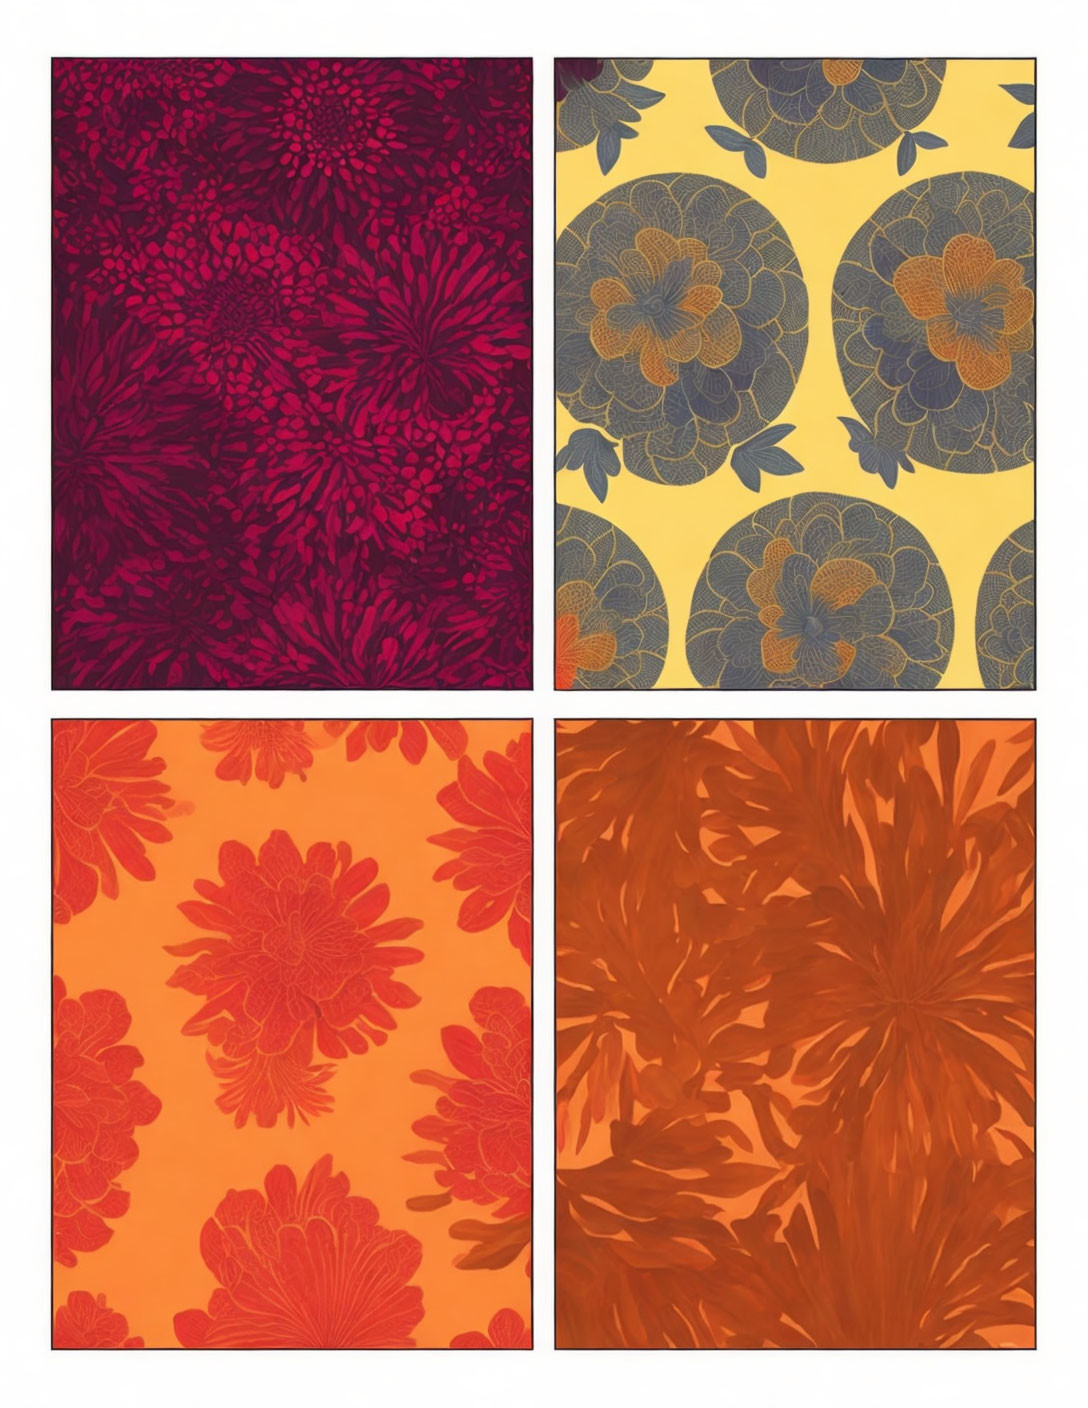 Floral pattern panels in red, blue, and orange on colorful backgrounds